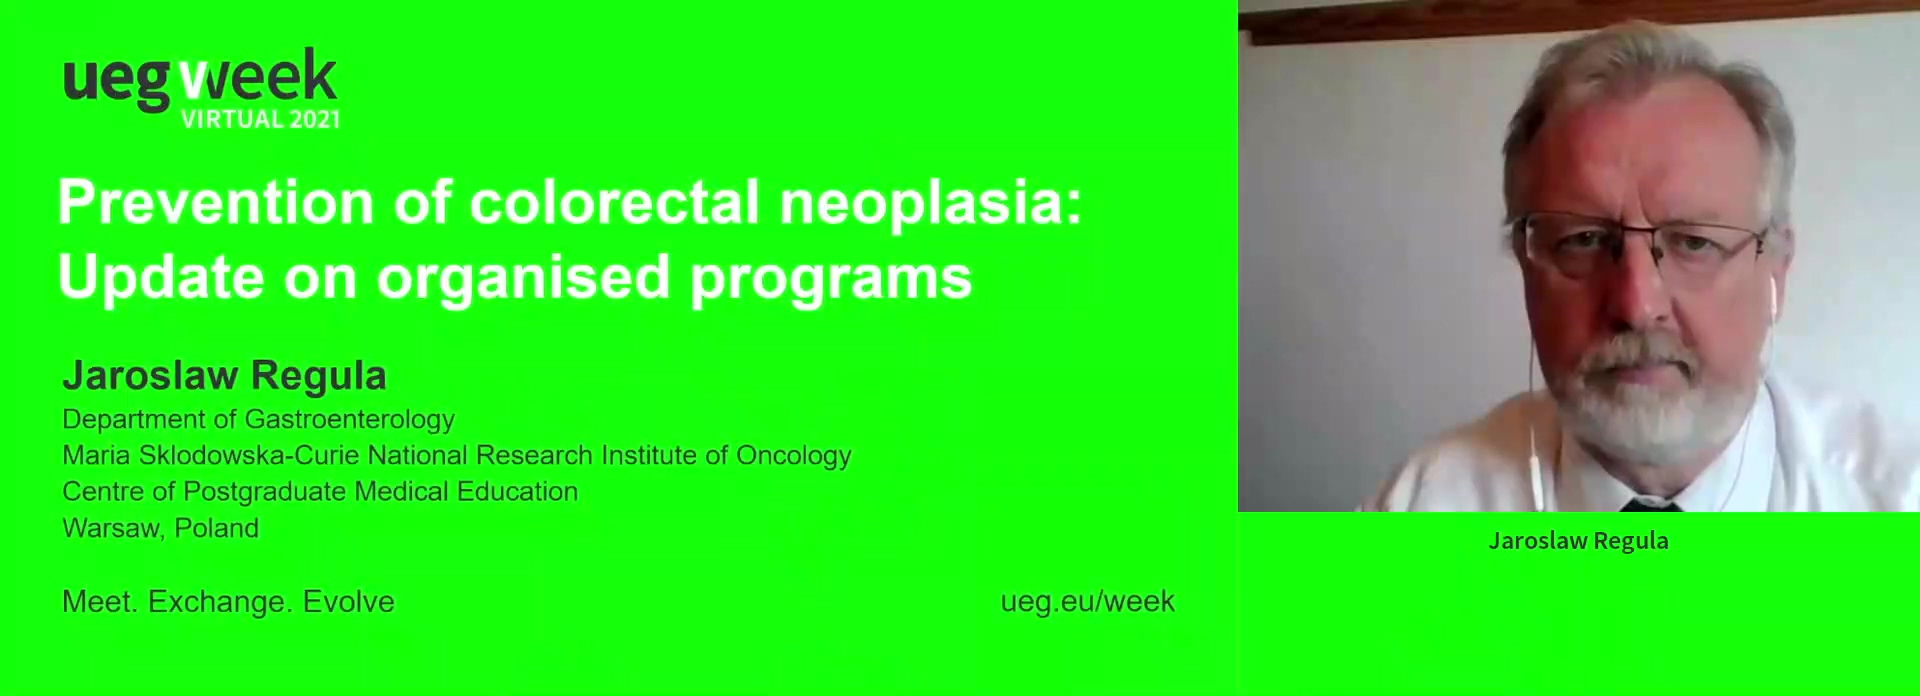 Prevention of colorectal neoplasia: Update on organised programs